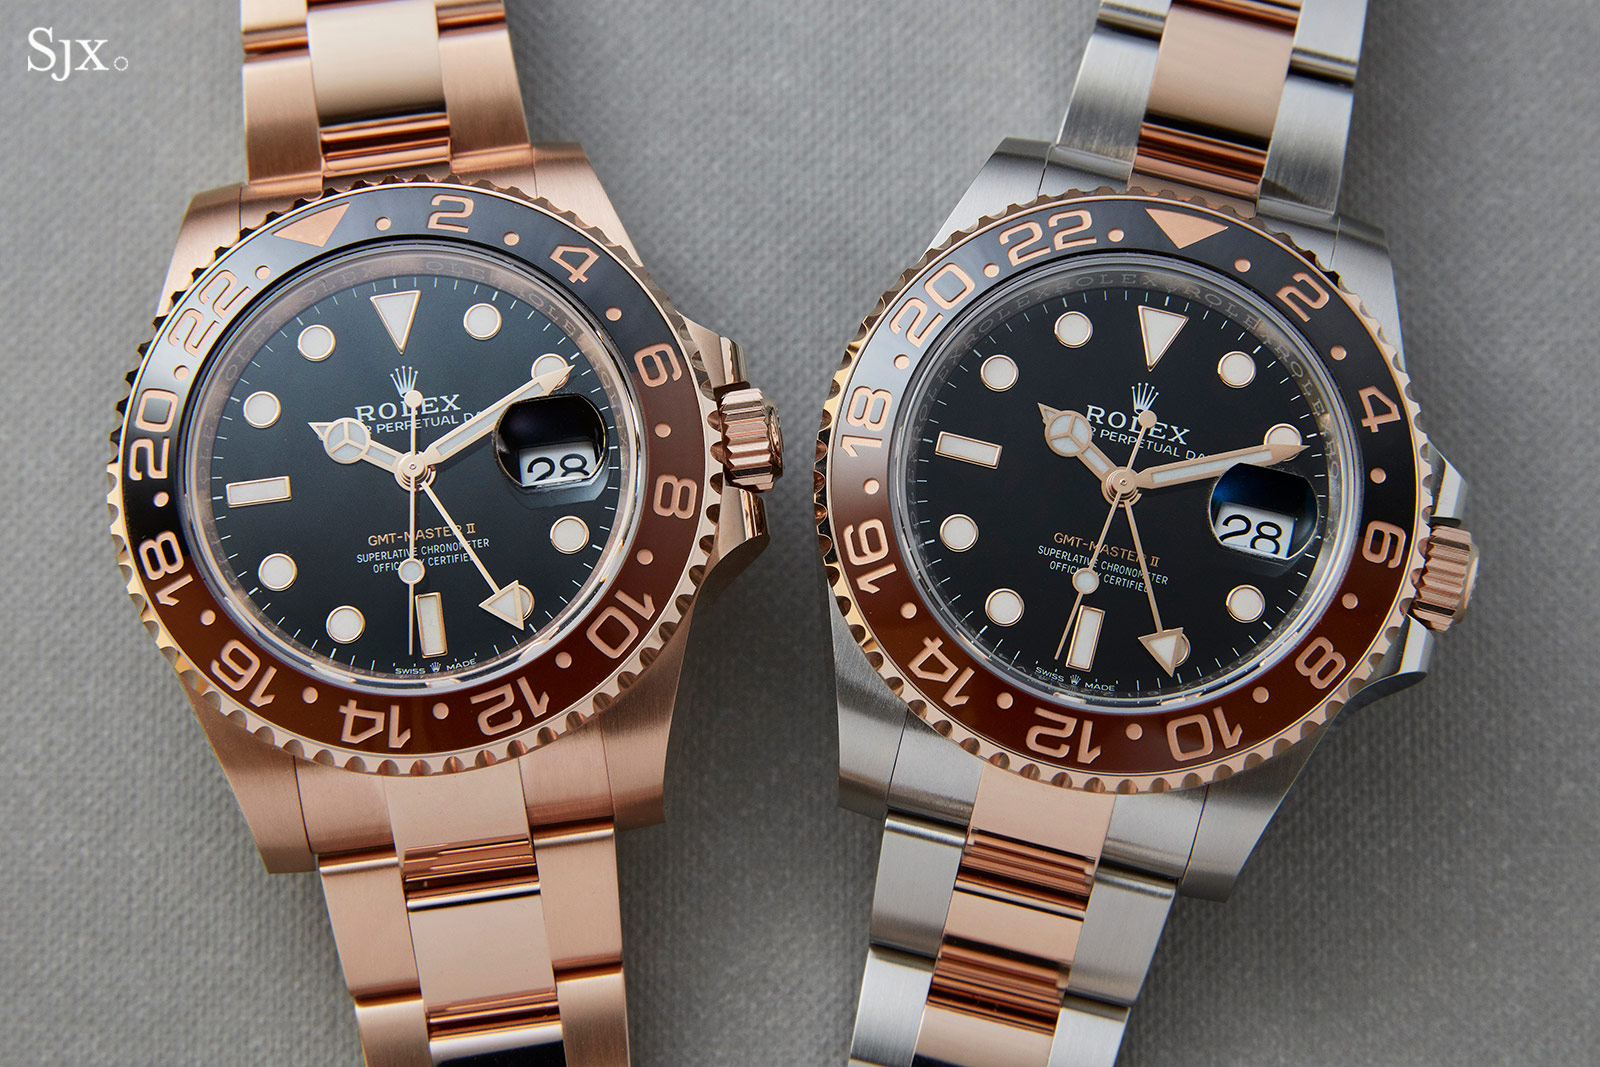 Hands-On with the Rolex GMT-Master II Replica Watches | Best Replica Watches For Sale